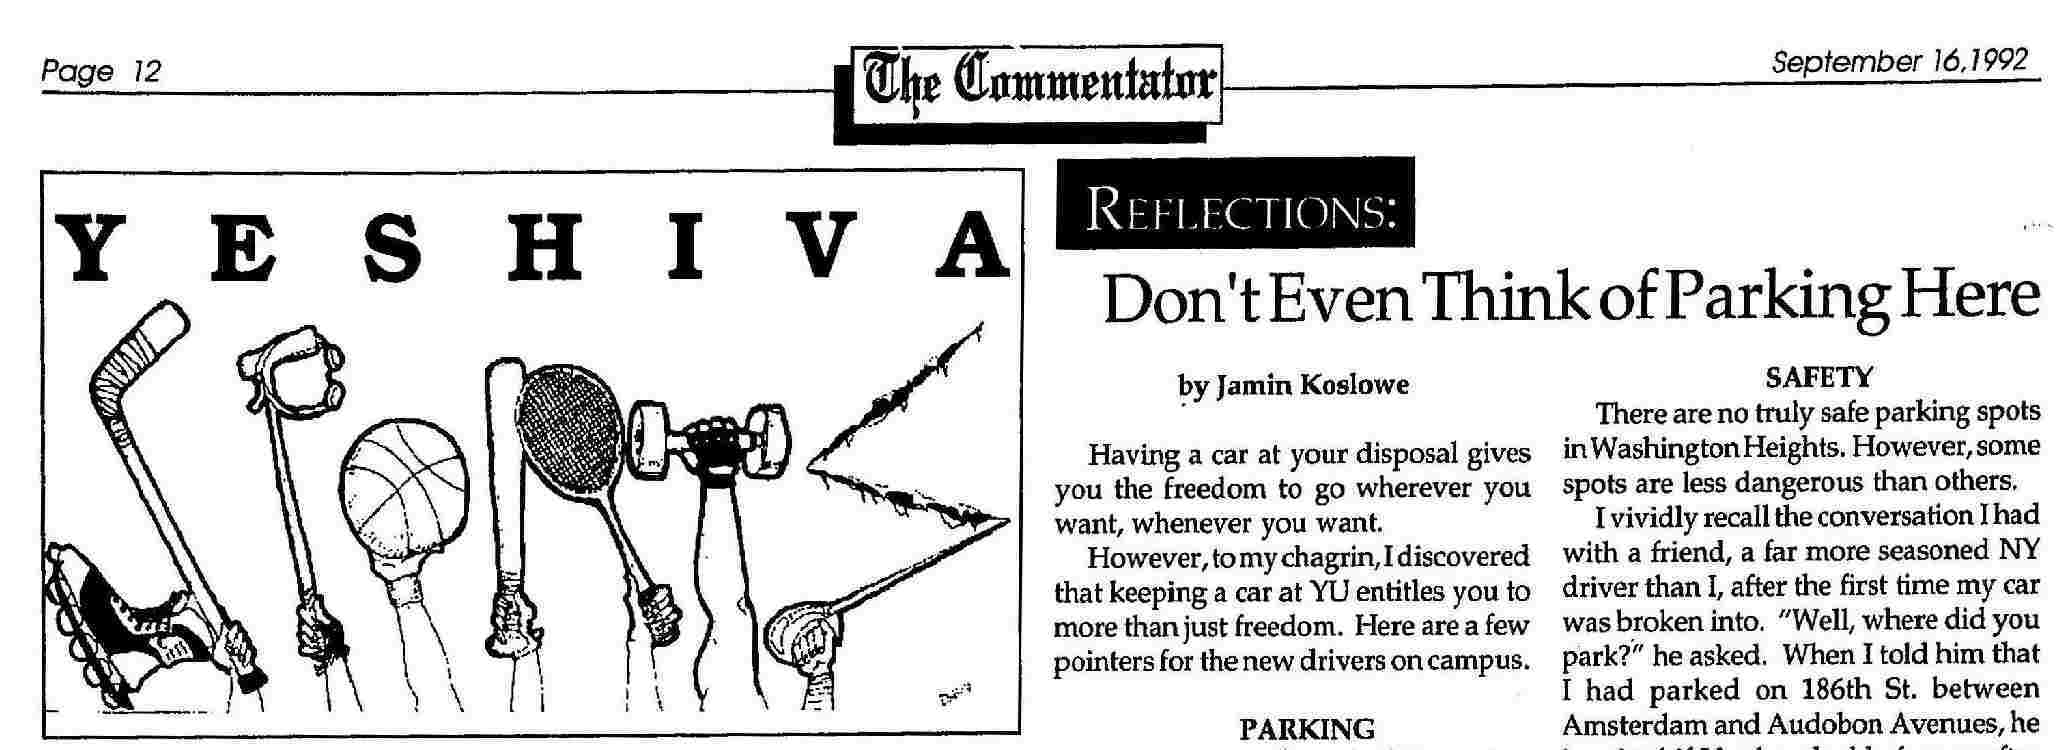 From the Commie Archives (September 16, 1992; Volume 58 Issue 2) — Don’t Even Think of Parking Here